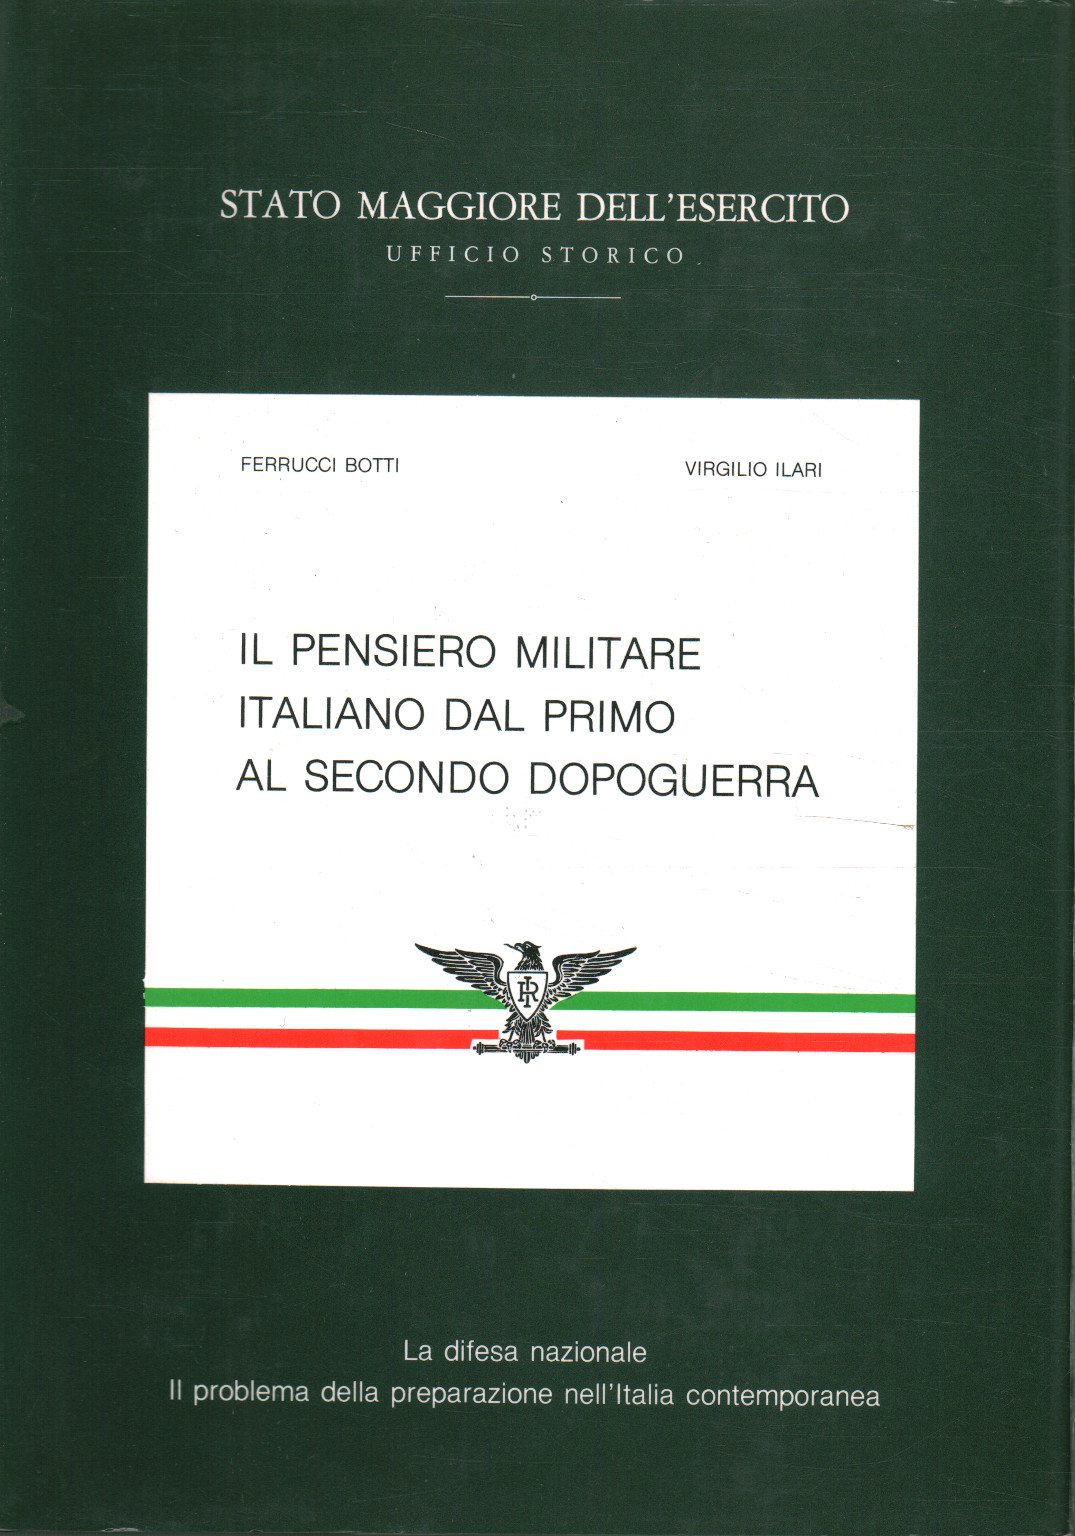 Italian military thought from the first%,Italian military thought from the first%,Italian military thought from the first%